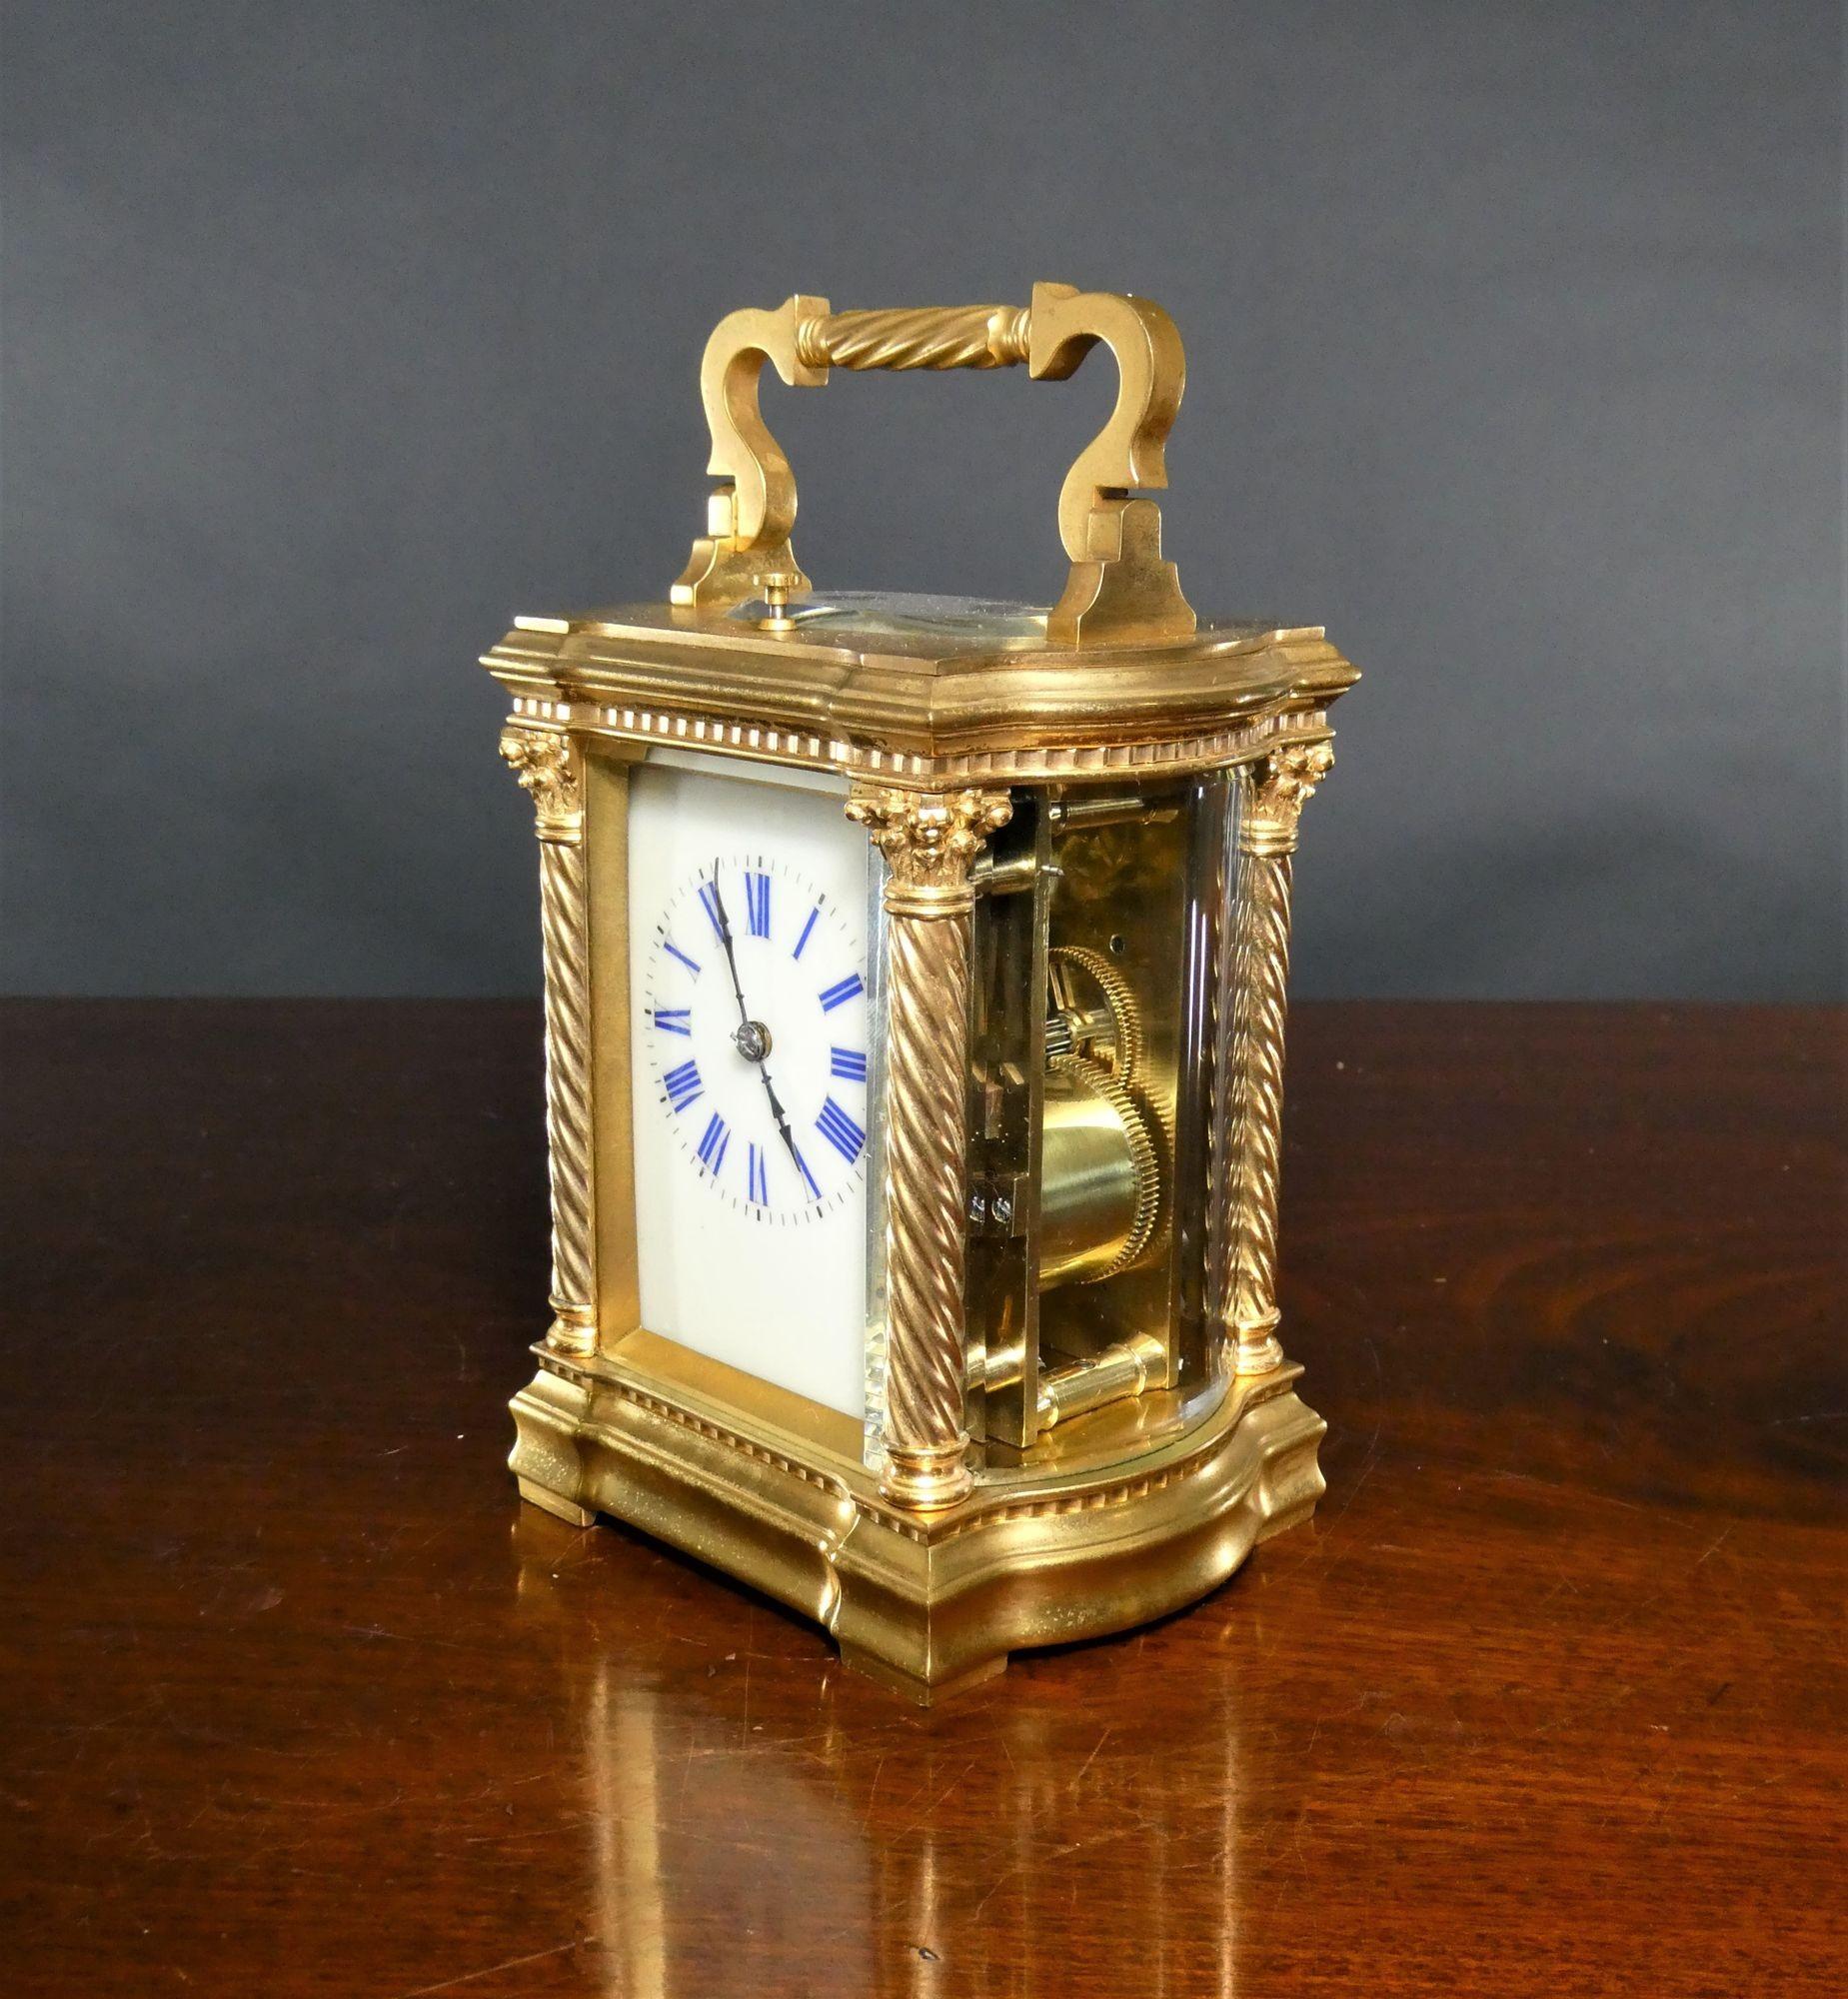 Ornate French Gilded Repeating Carriage Clock
 
Ornate French gilded carriage clock housed in a decorative case with curved side panels.  Barley twist columns with Corinthian capitals and decorative moulding to the top and bottom of the case ion all